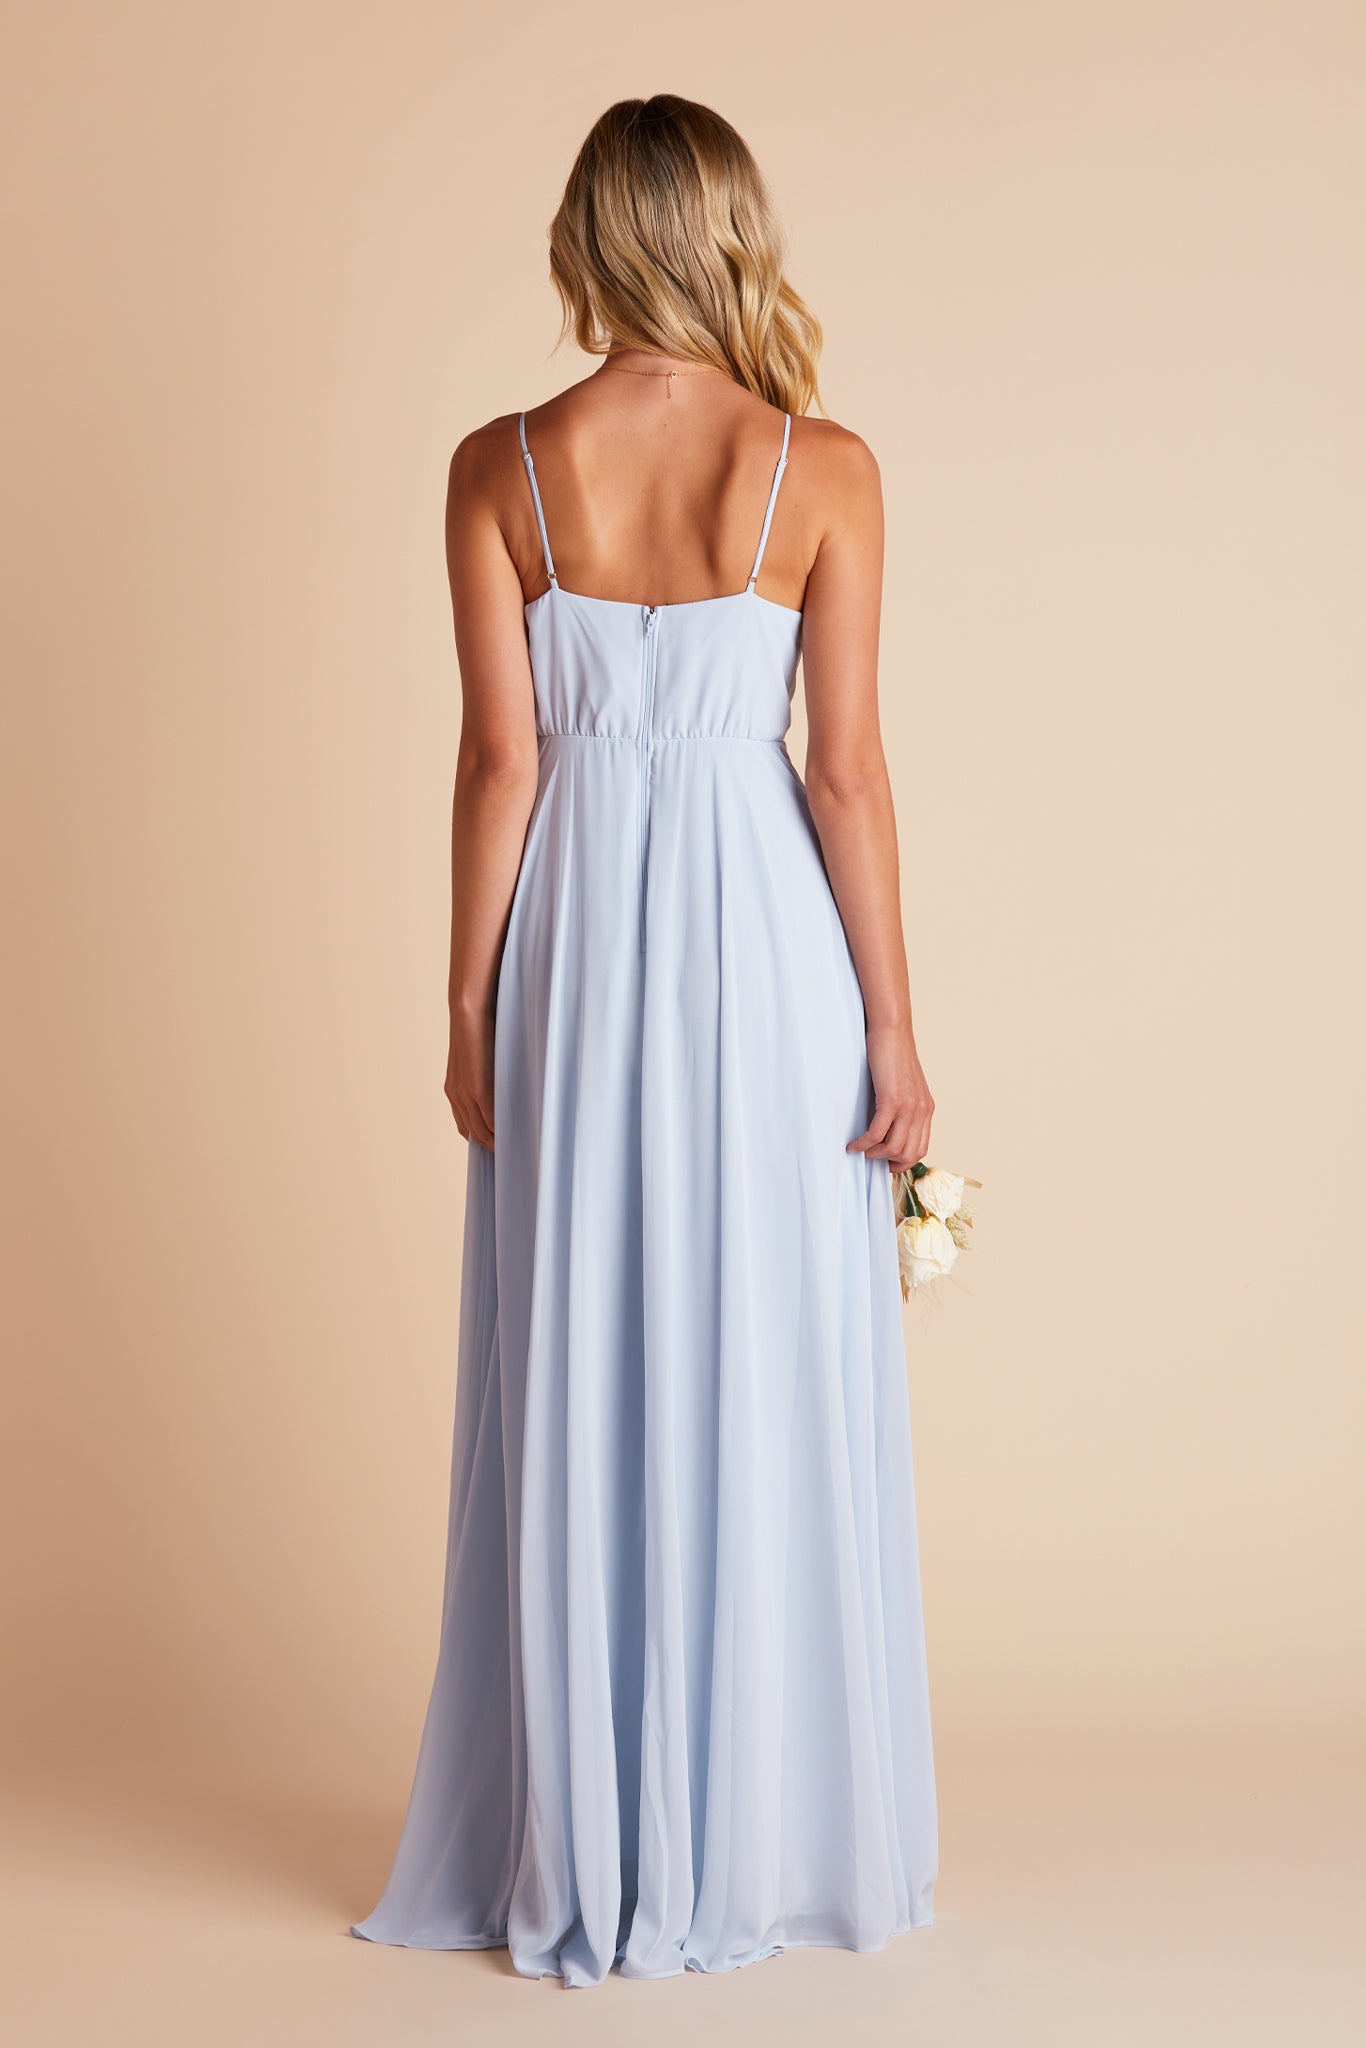 Kaia bridesmaids dress in ice blue chiffon by Birdy Grey, back view